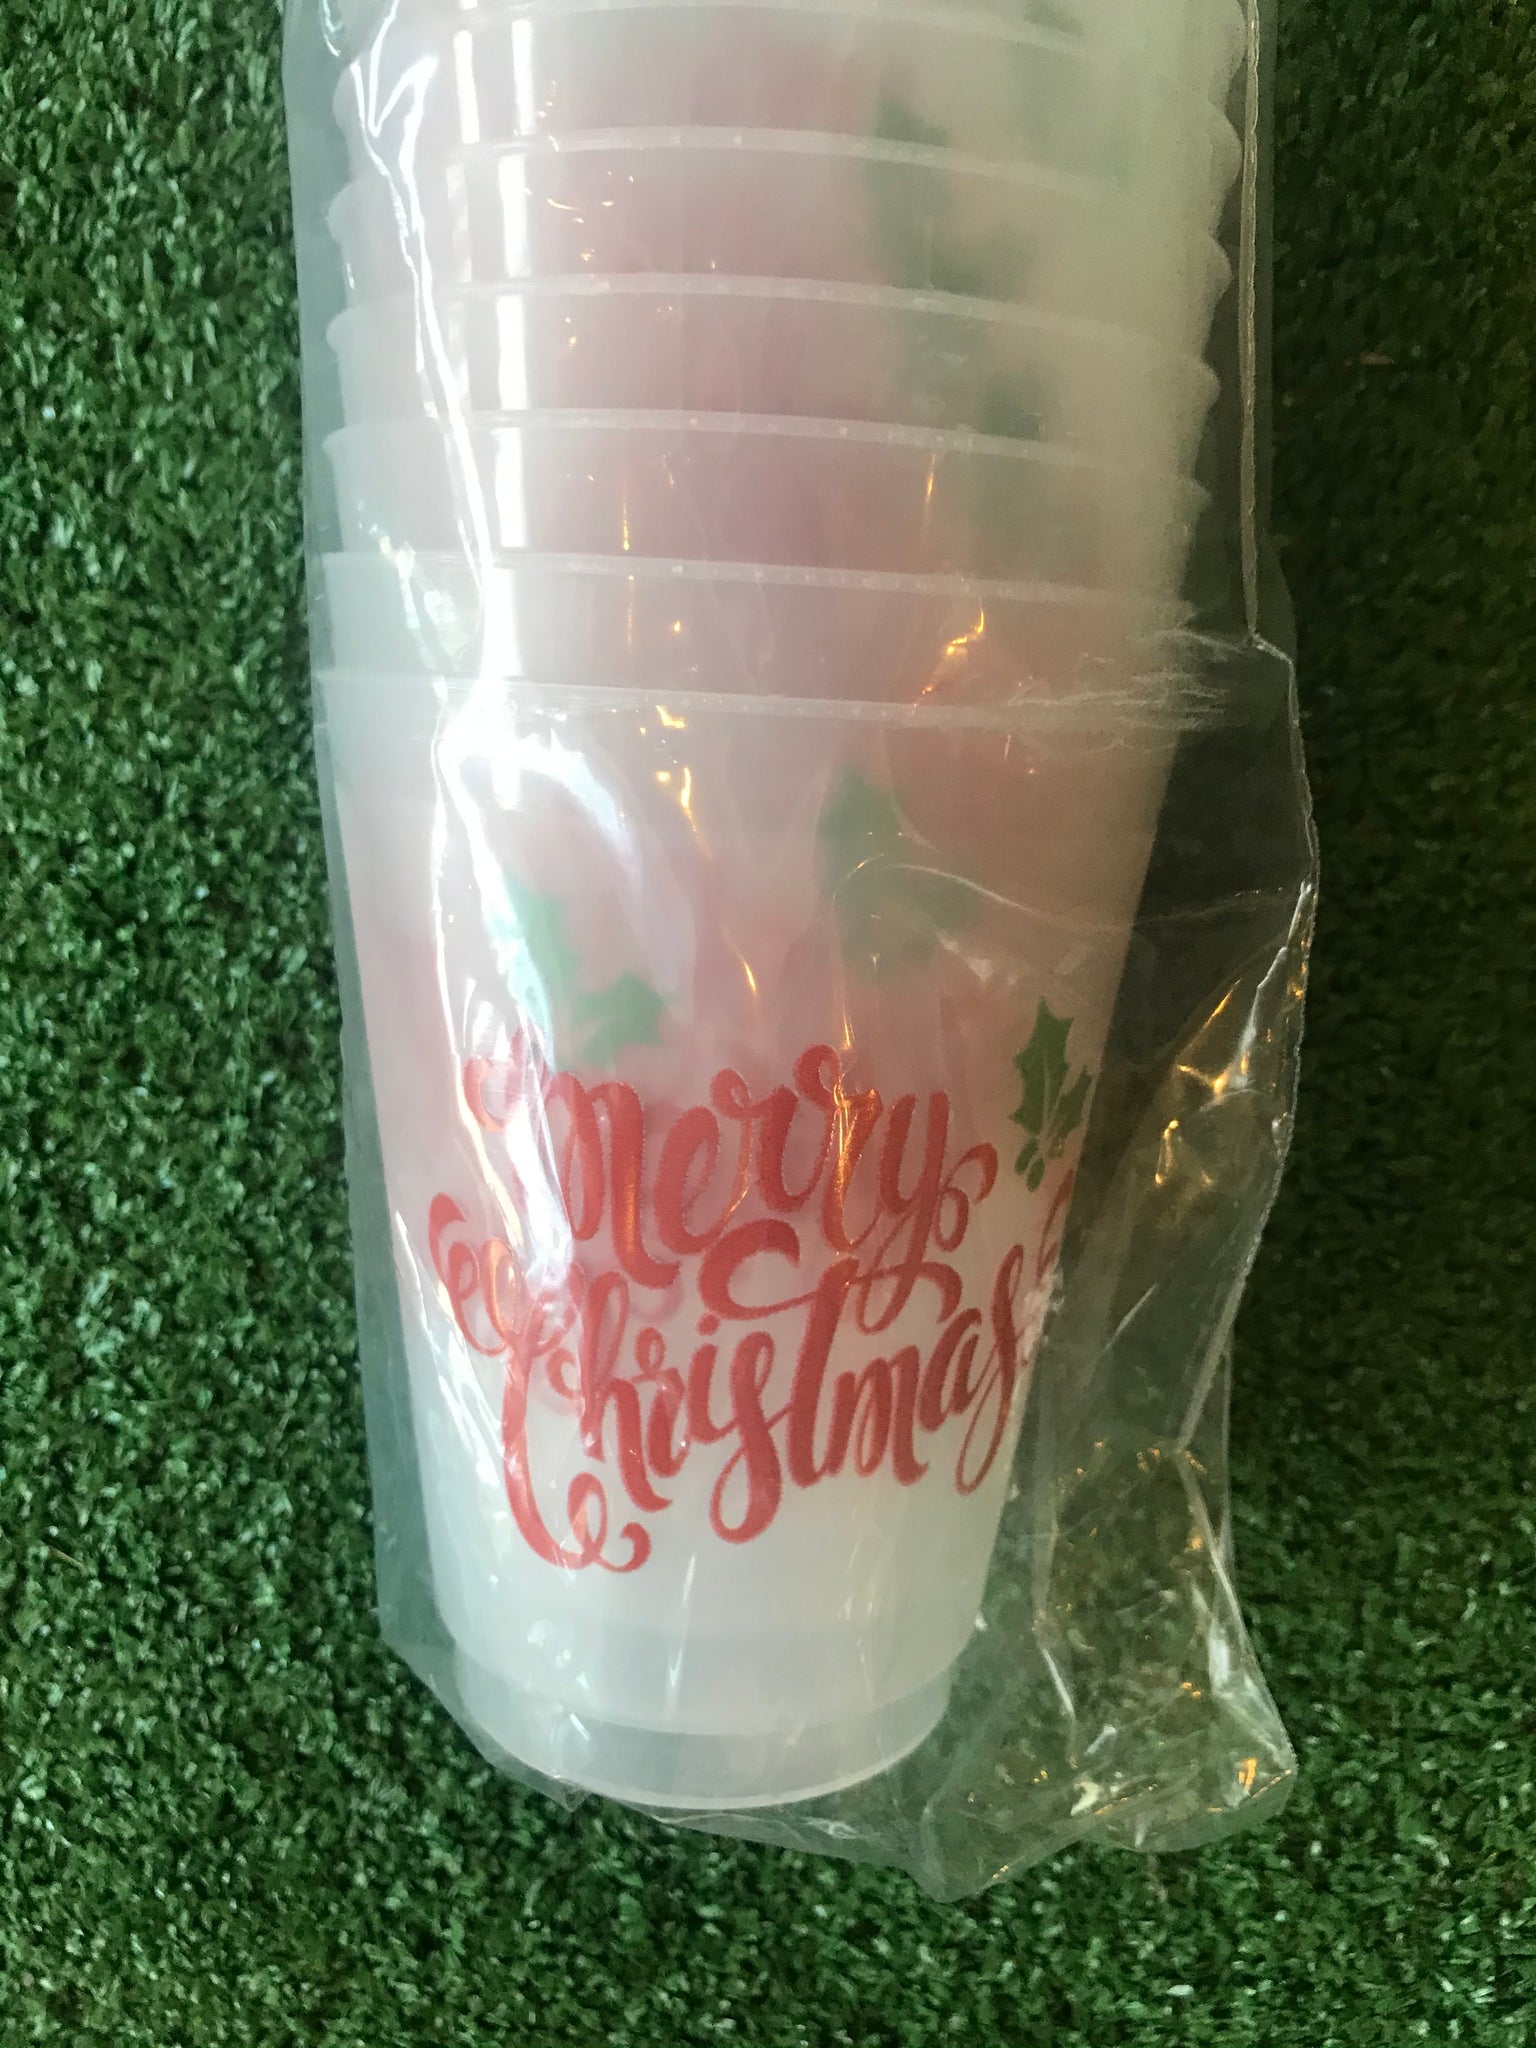 Frost Flex Merry Christmas 16 oz cups. 10 count